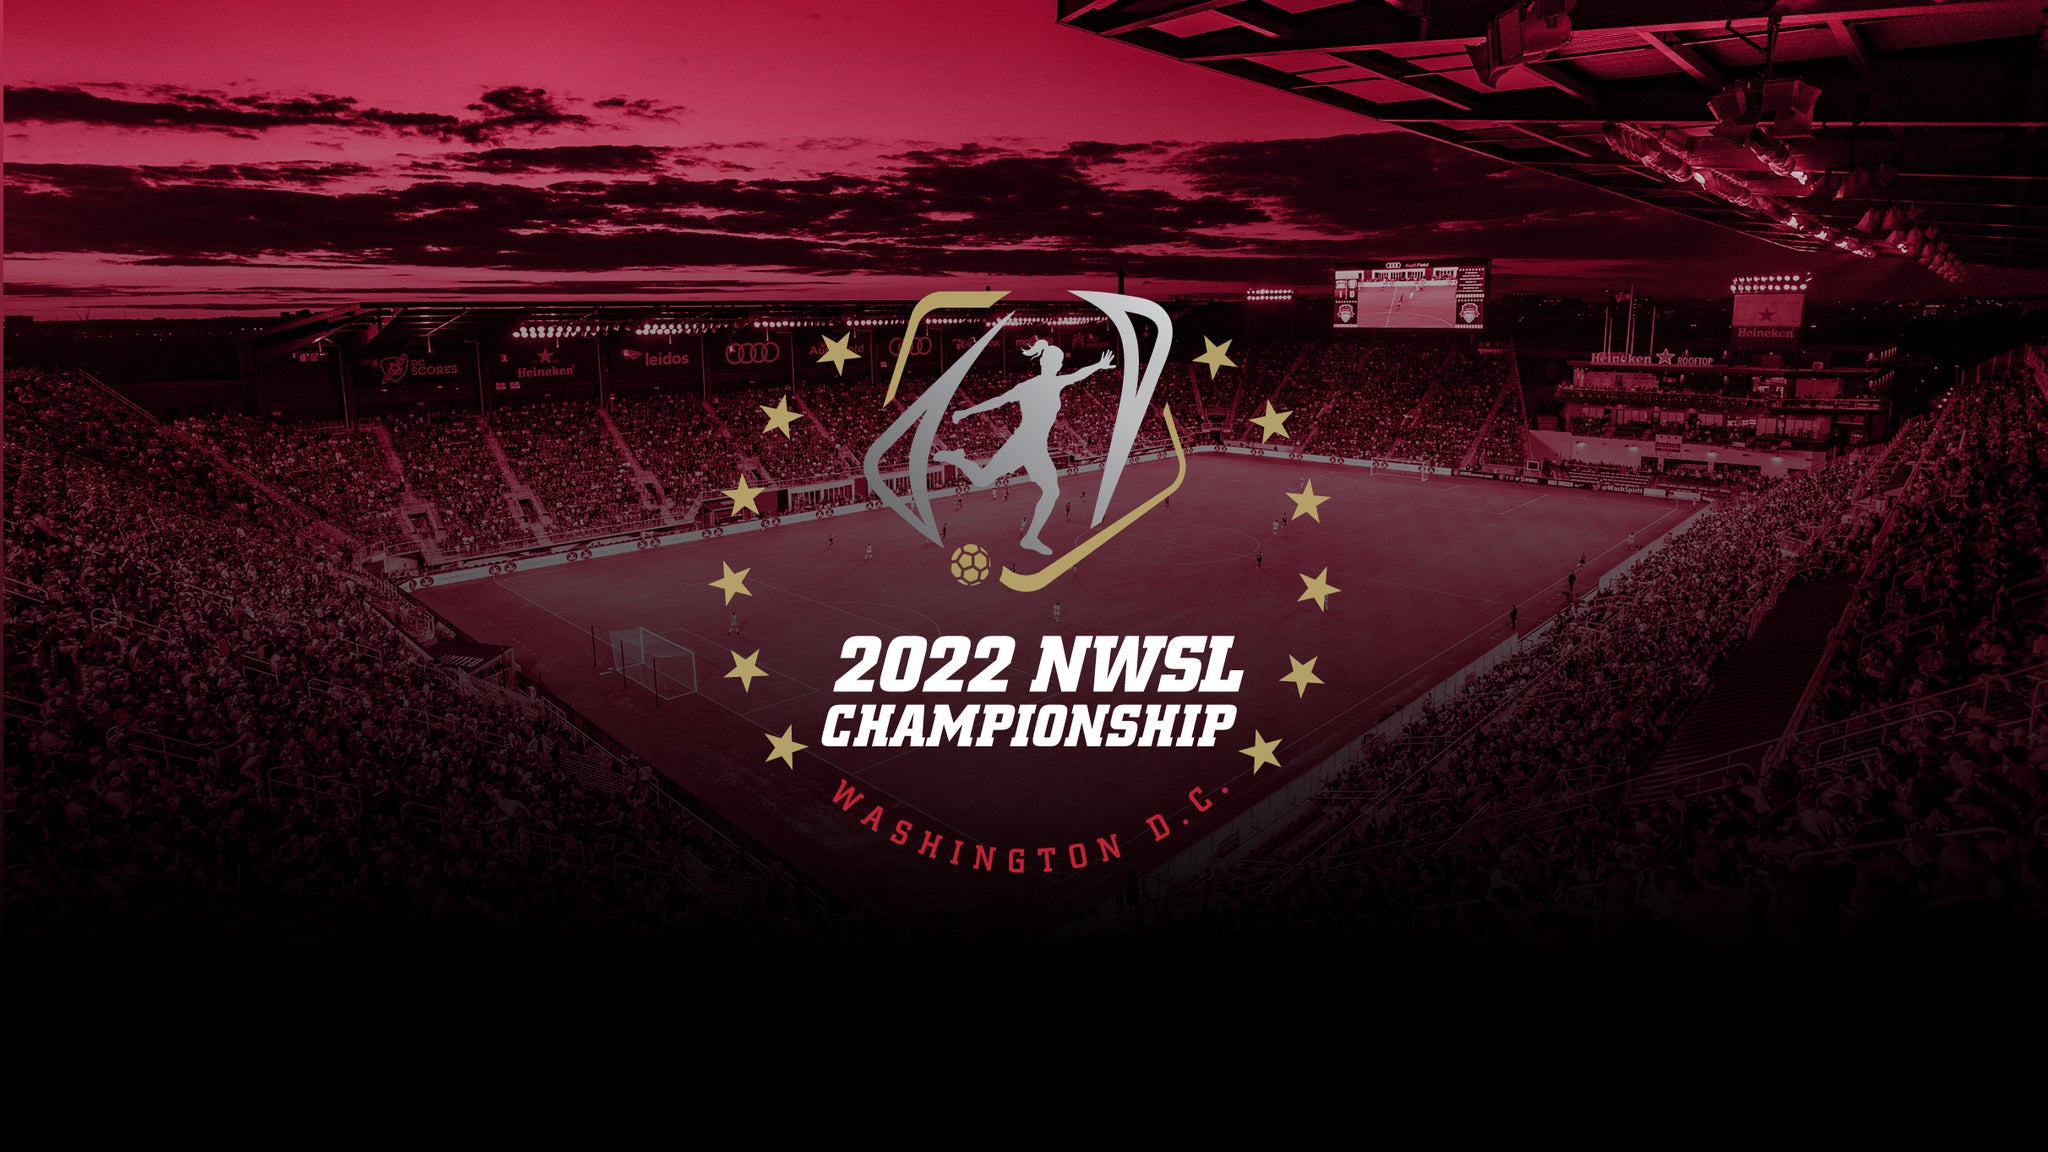 NWSL Championship Tickets Single Game Tickets & Schedule